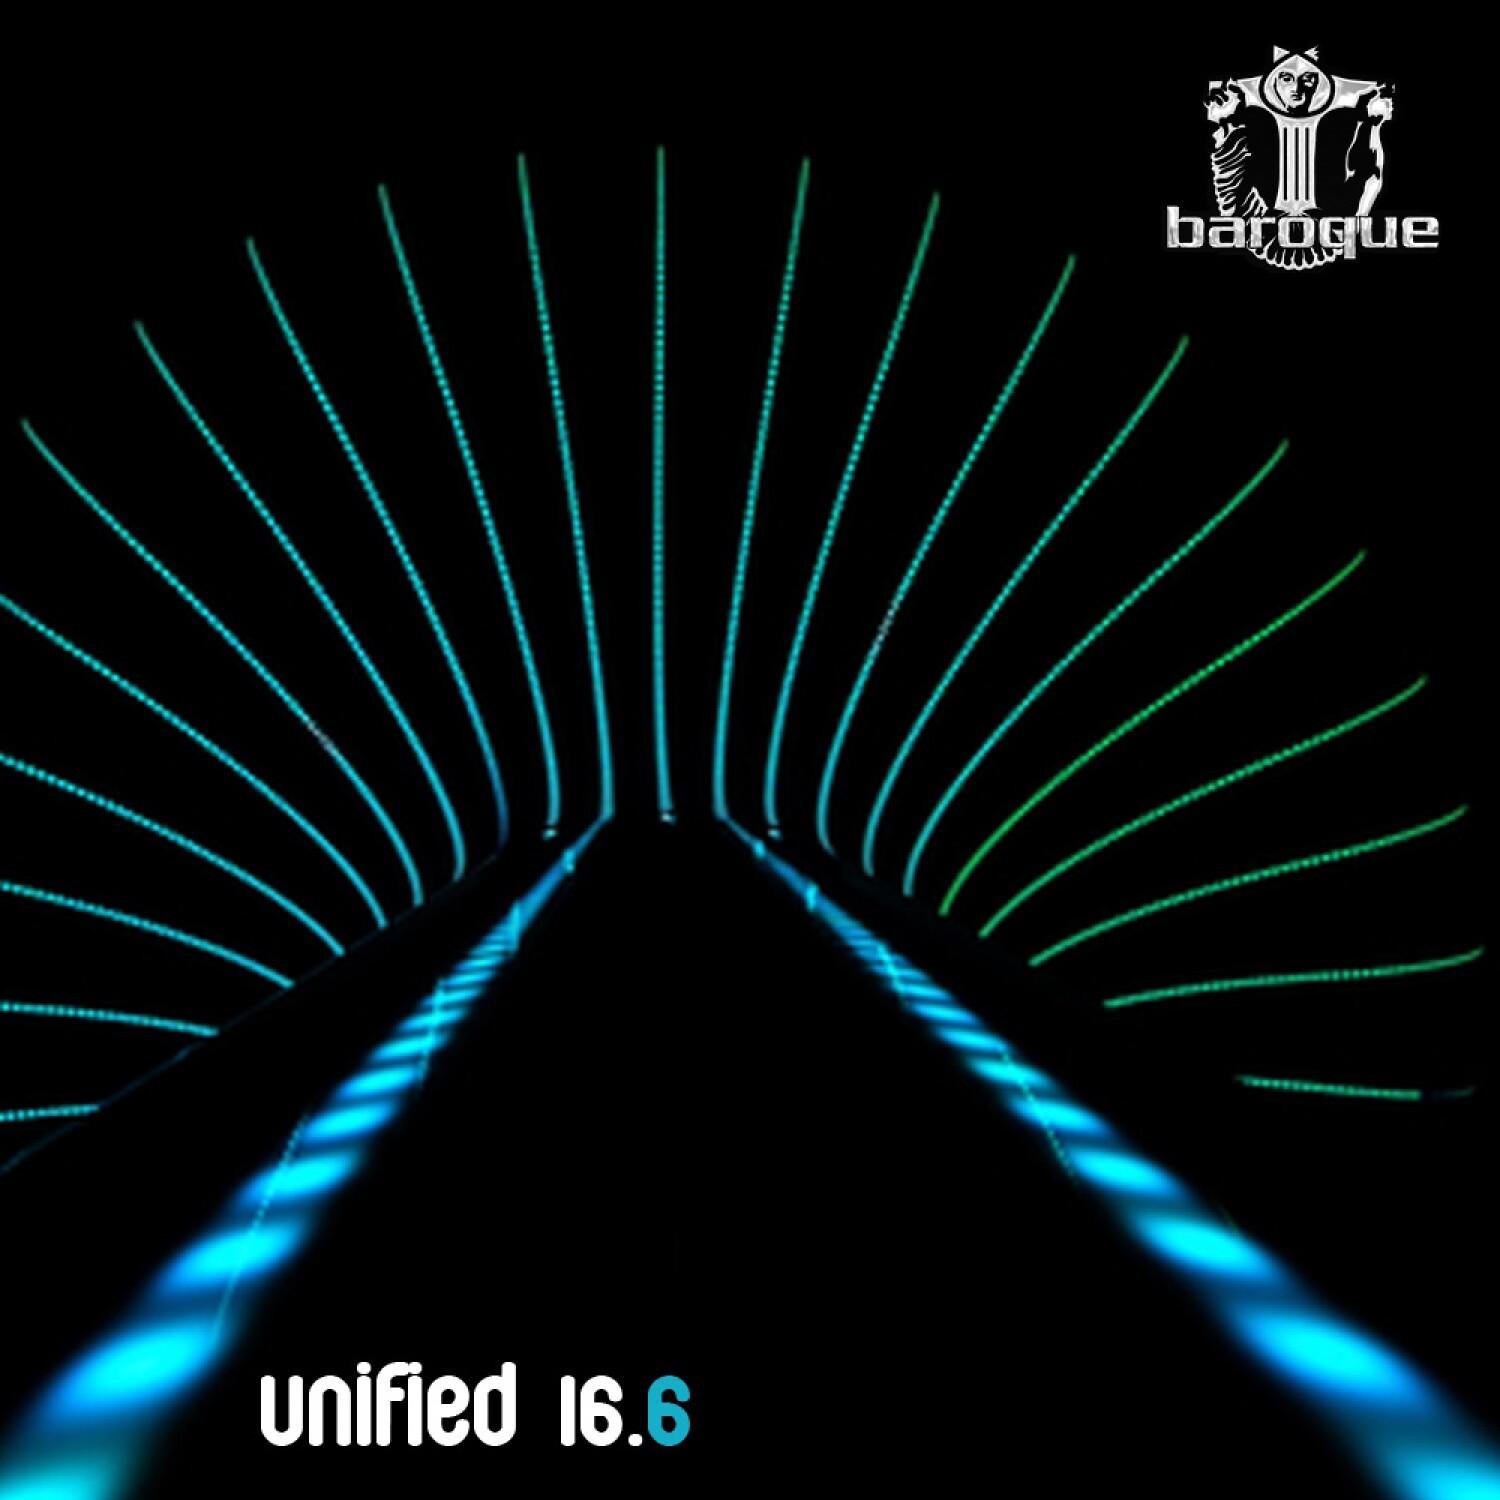 Unified 16.6